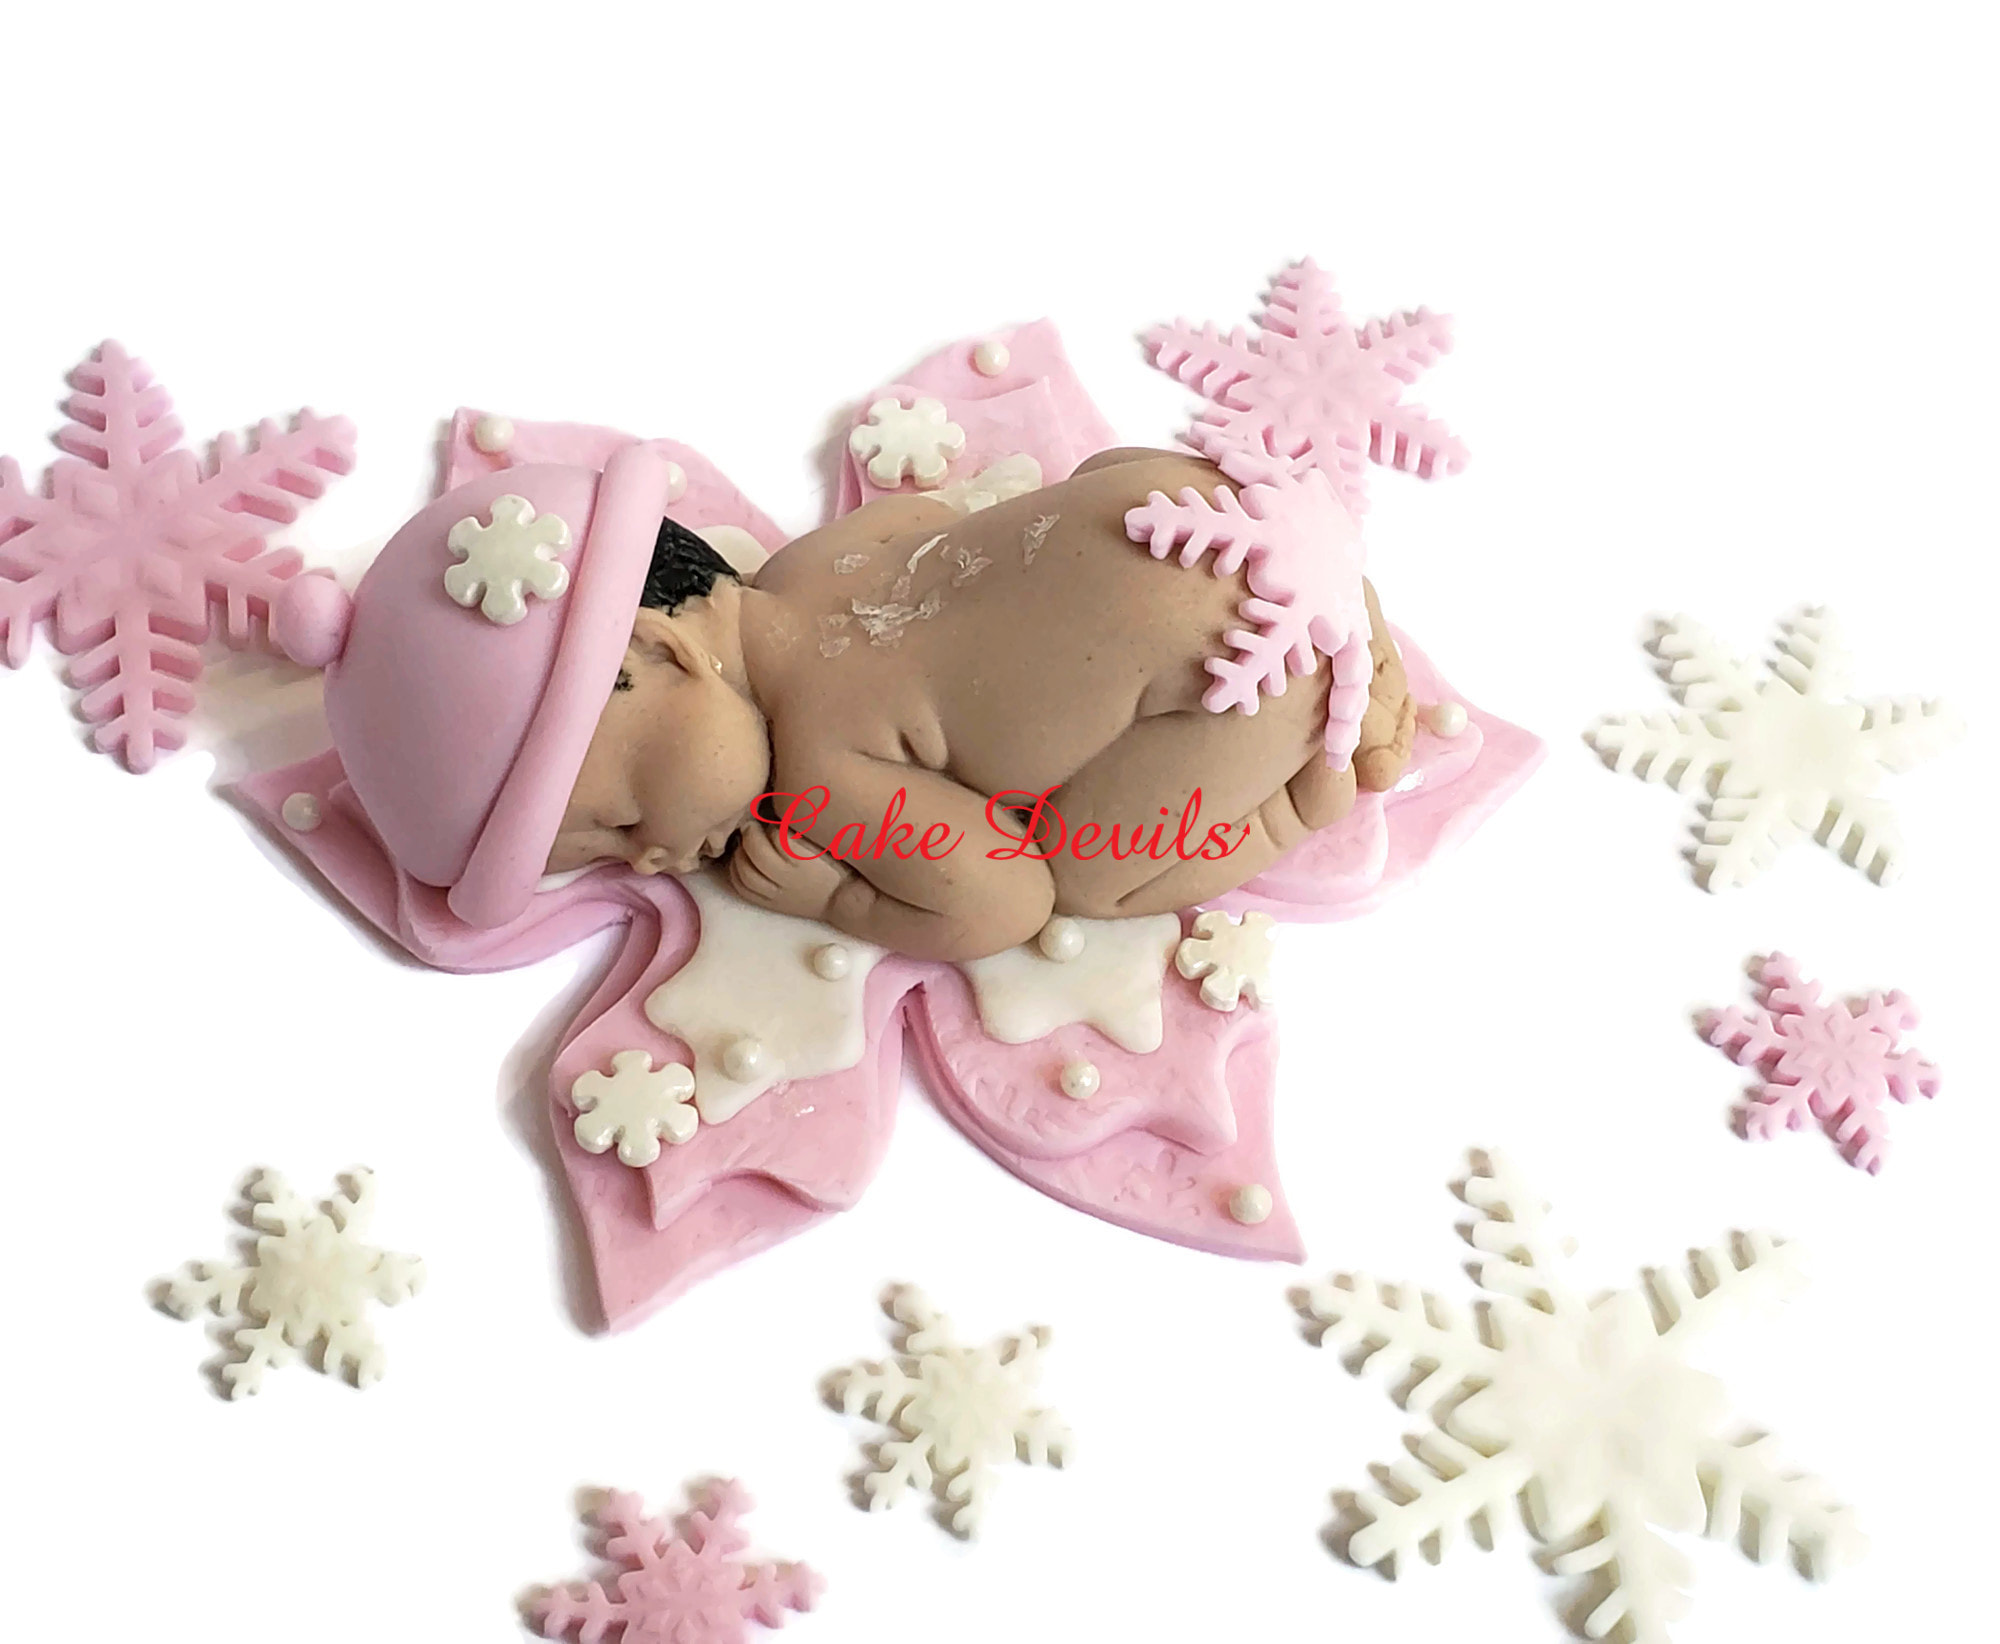  Little Snowflake Baby Shower Decorations, Winter